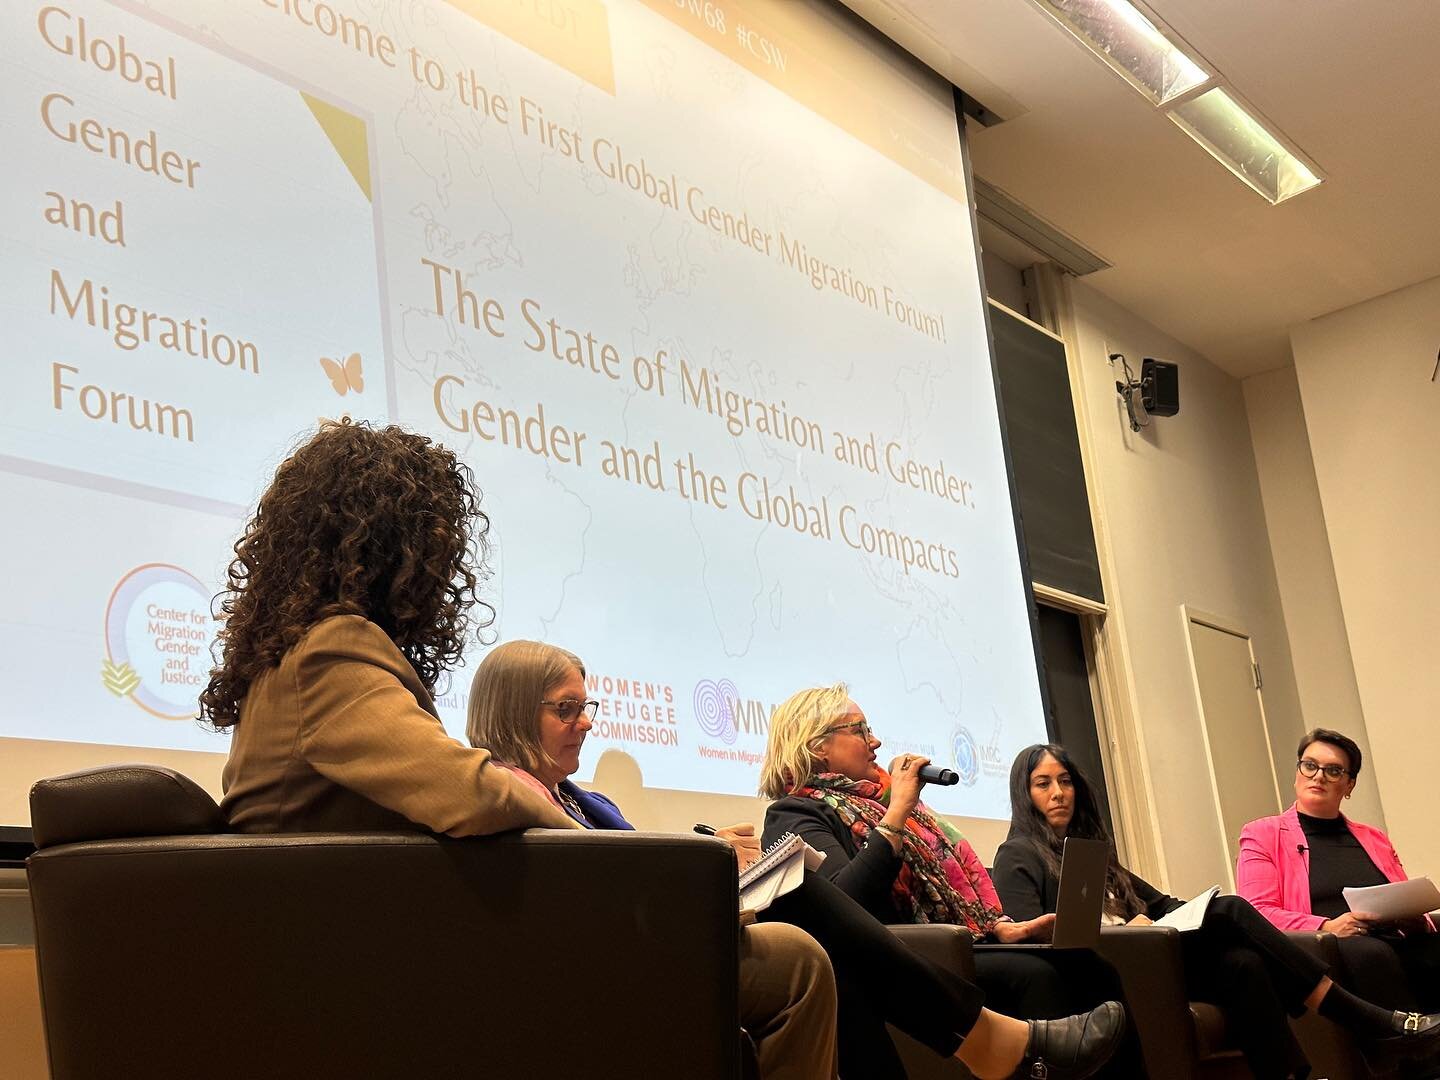 🔊First Global Gender and Migration Forum - Day 1📢

🎉 Yesterday, we kicked-off the First Global Gender and Migration Forum with a panel discussion on: &ldquo;The State of Migration and Gender: Gender in the Global Compacts&rdquo;

➡️ The panel was 